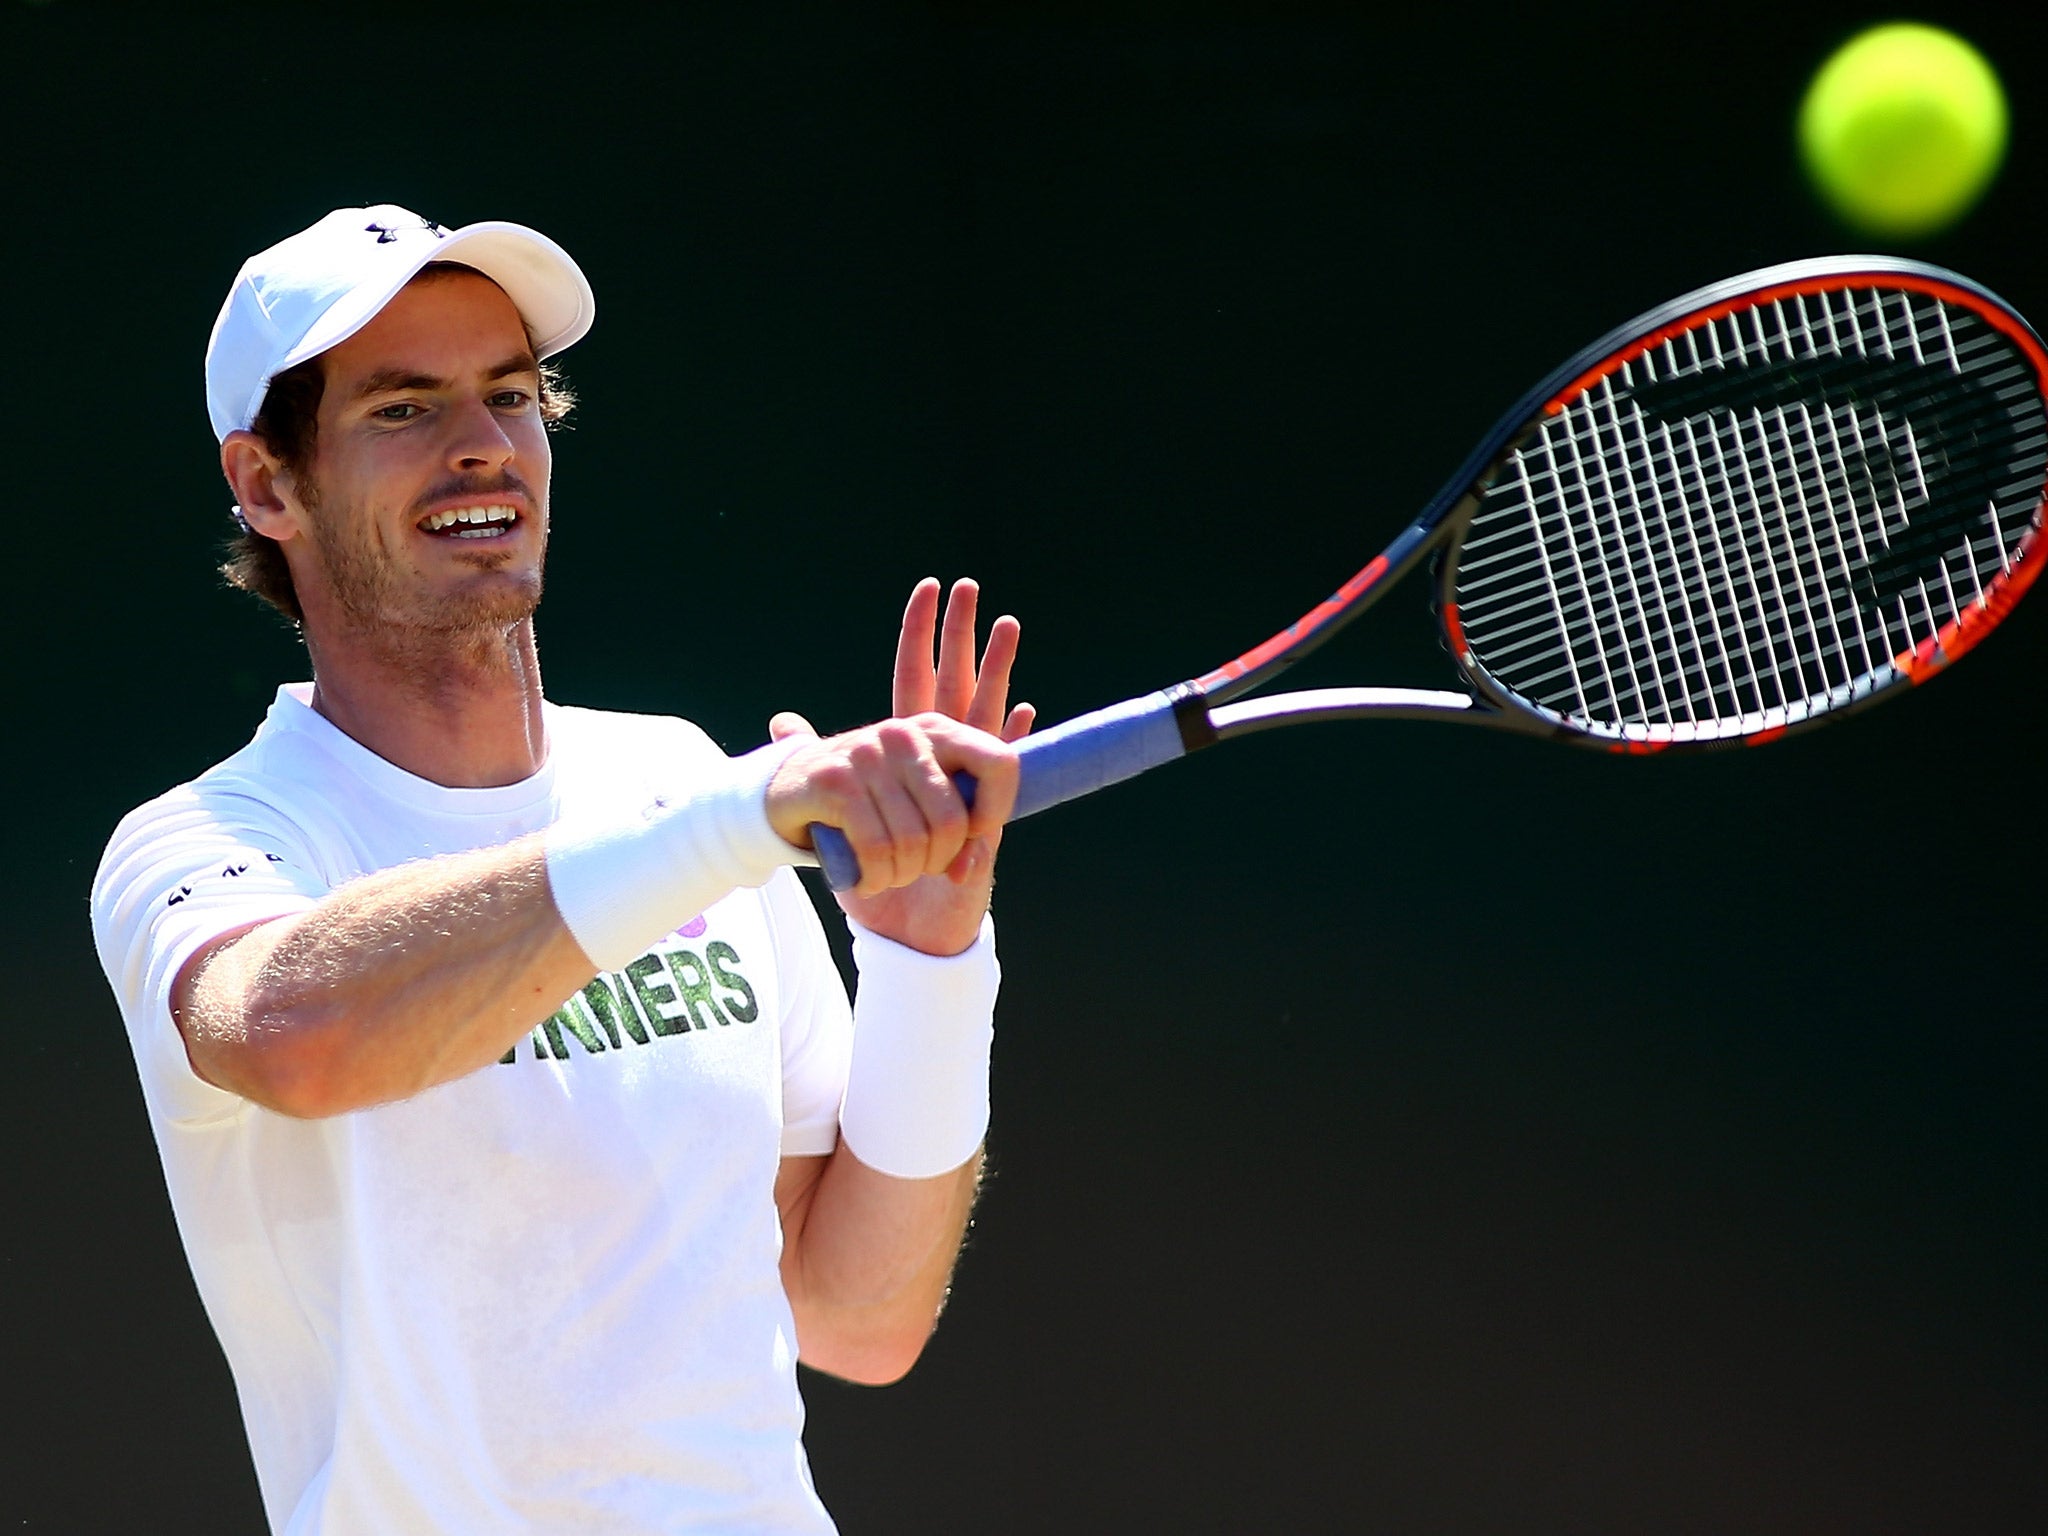 Andy Murray takes on Tomas Berdych in the men's Wimbledon semi-finals